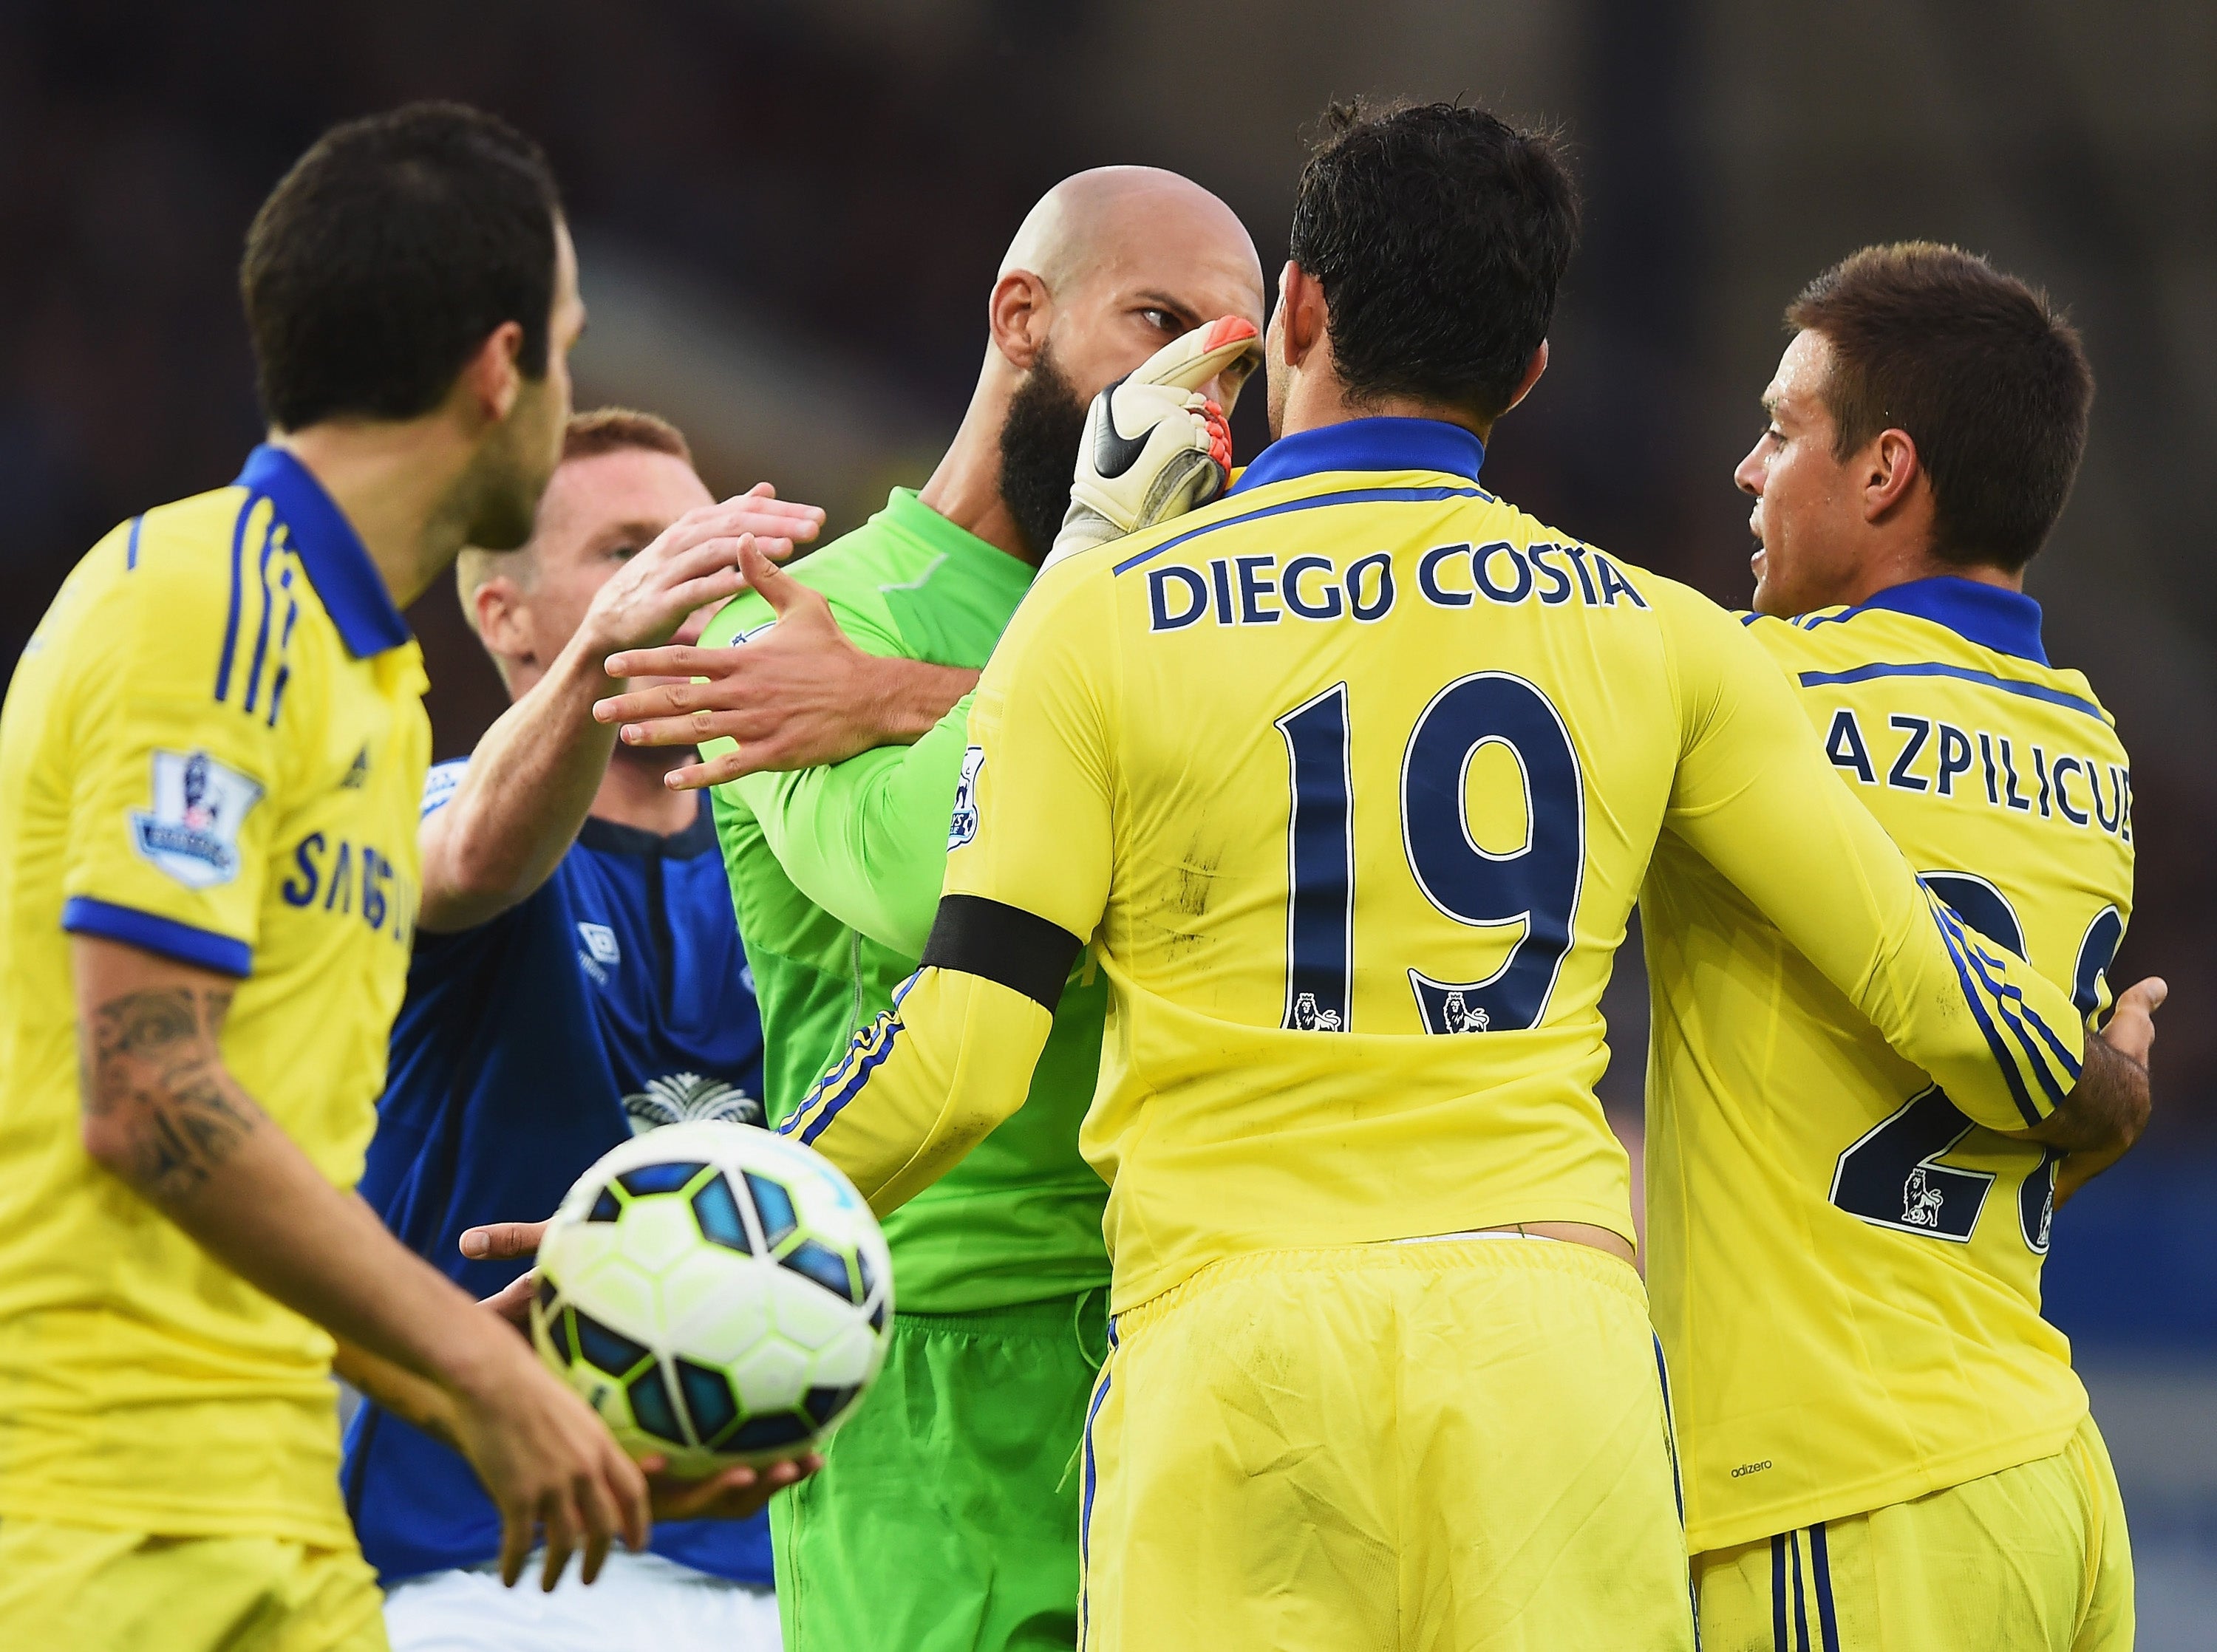 Costa was involved in a row during a match at Goodison Park this season